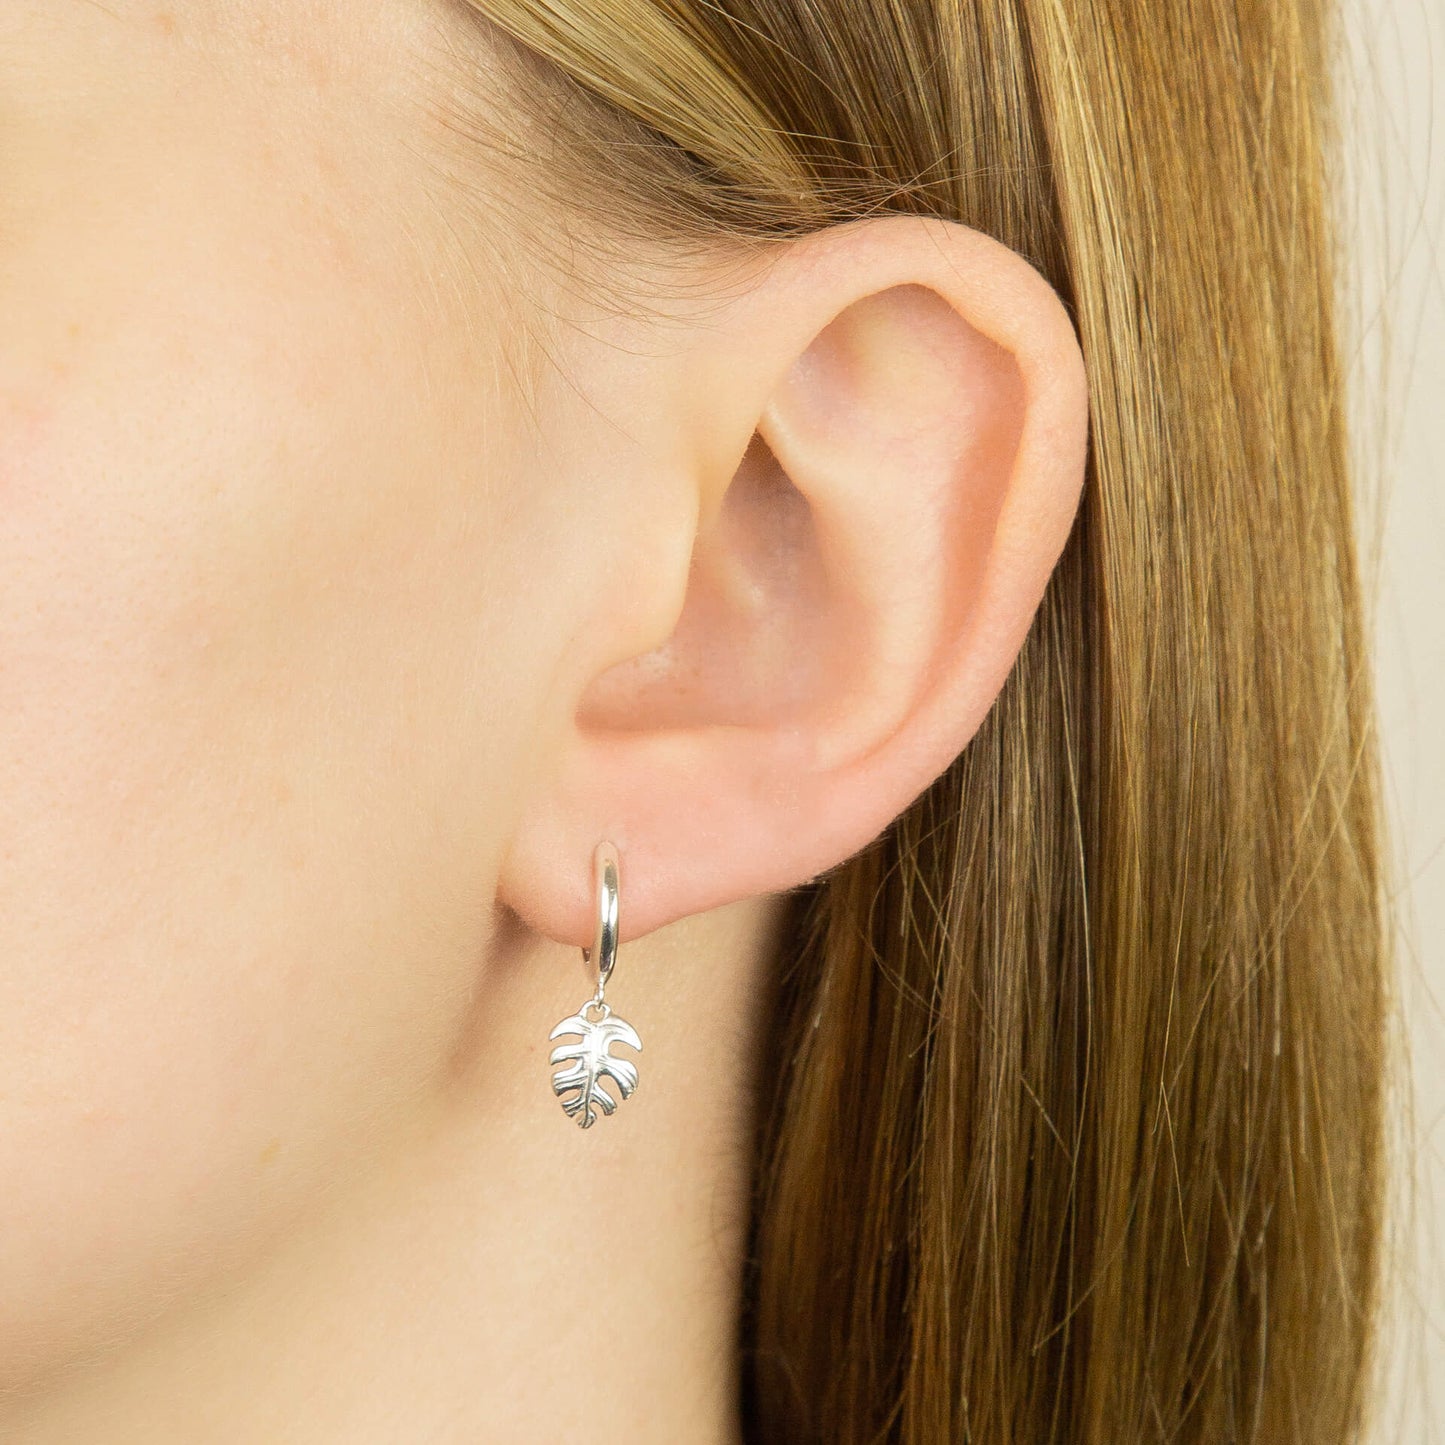 Recycled Silver Hoop Earrings With Palm Leaf Charm